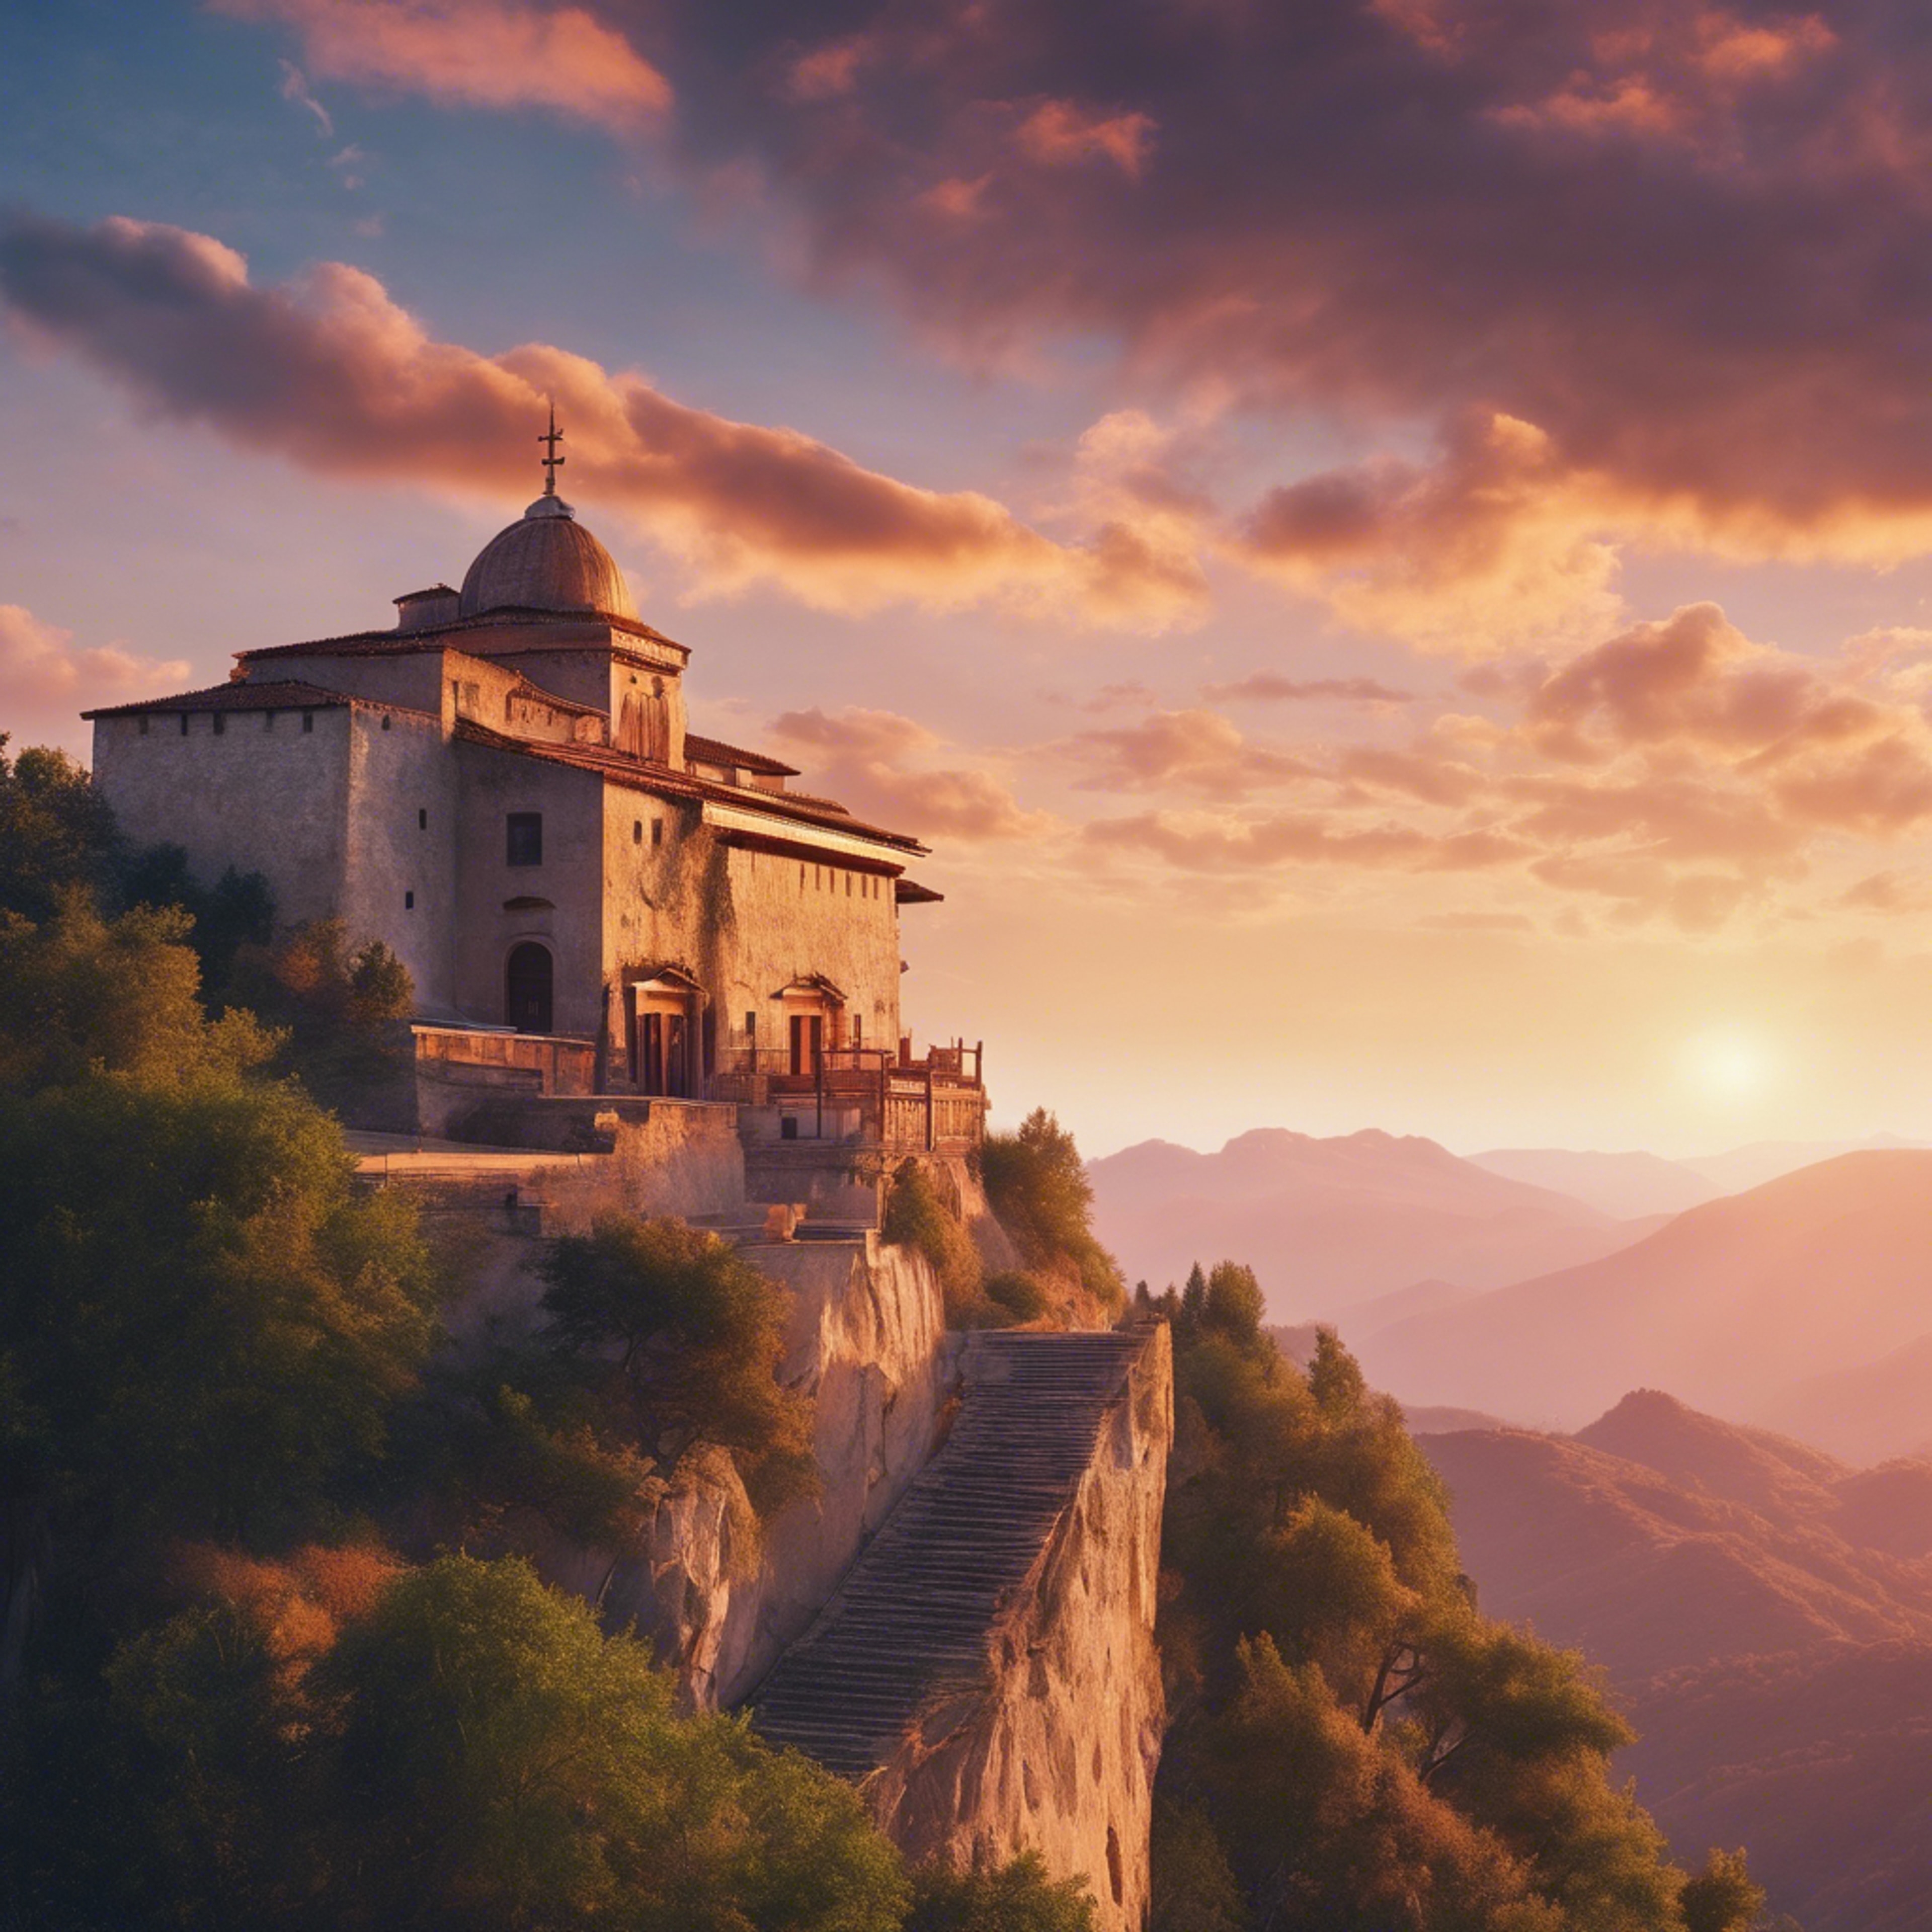 A quiet monastery perched high on a mountain, under the blend of beautiful sunset colors. Wallpaper[600c6907833a4be197a4]